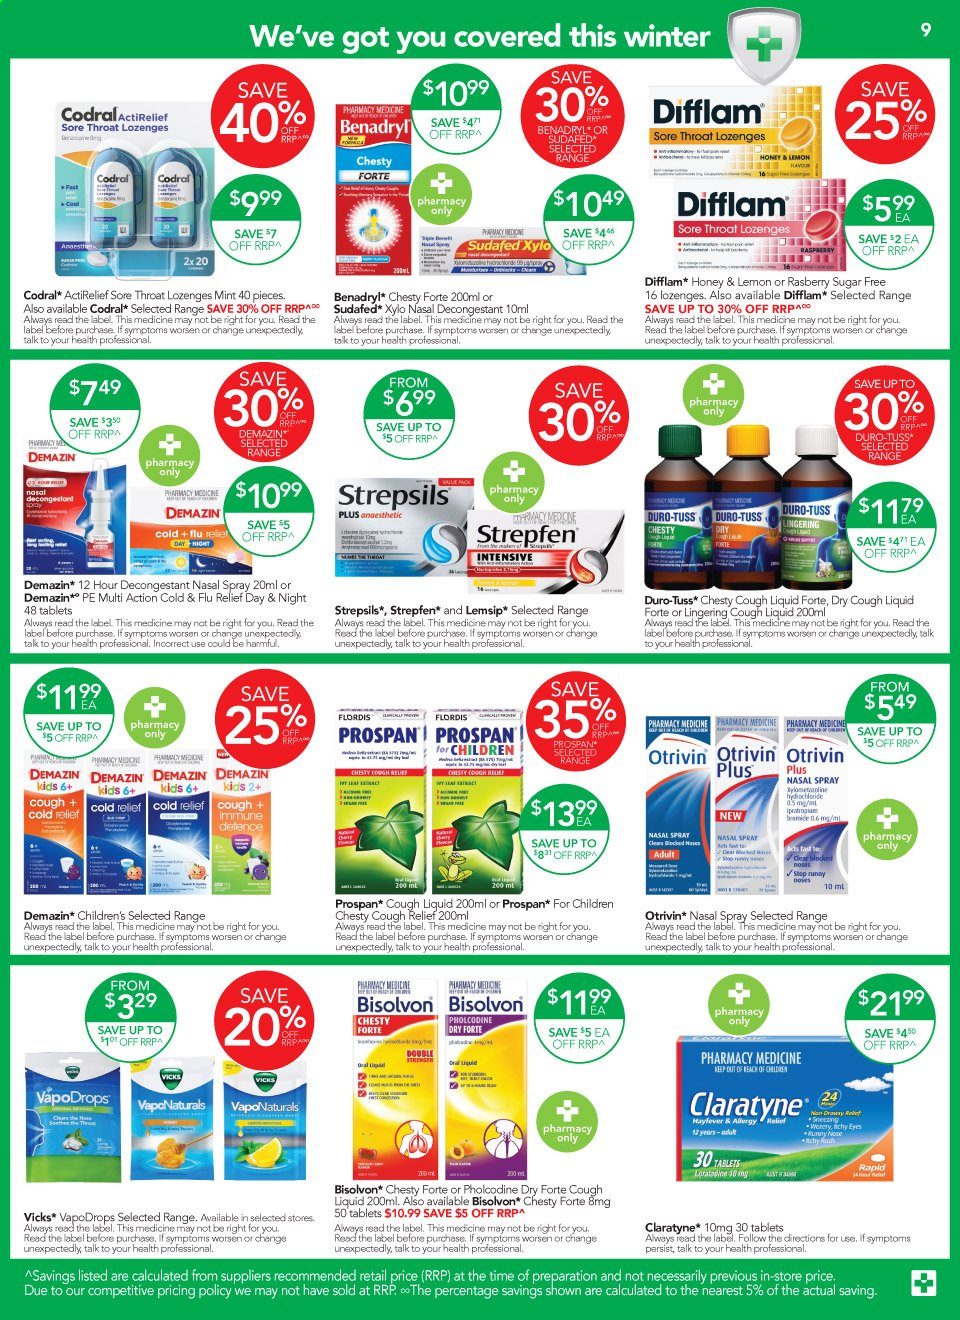 thumbnail - TerryWhite Chemmart Catalogue - 15 Apr 2021 - 4 May 2021 - Sales products - Vicks, Cold & Flu, Sudafed, Strepsils, Claratyne, nasal spray, allergy relief, Codral. Page 10.